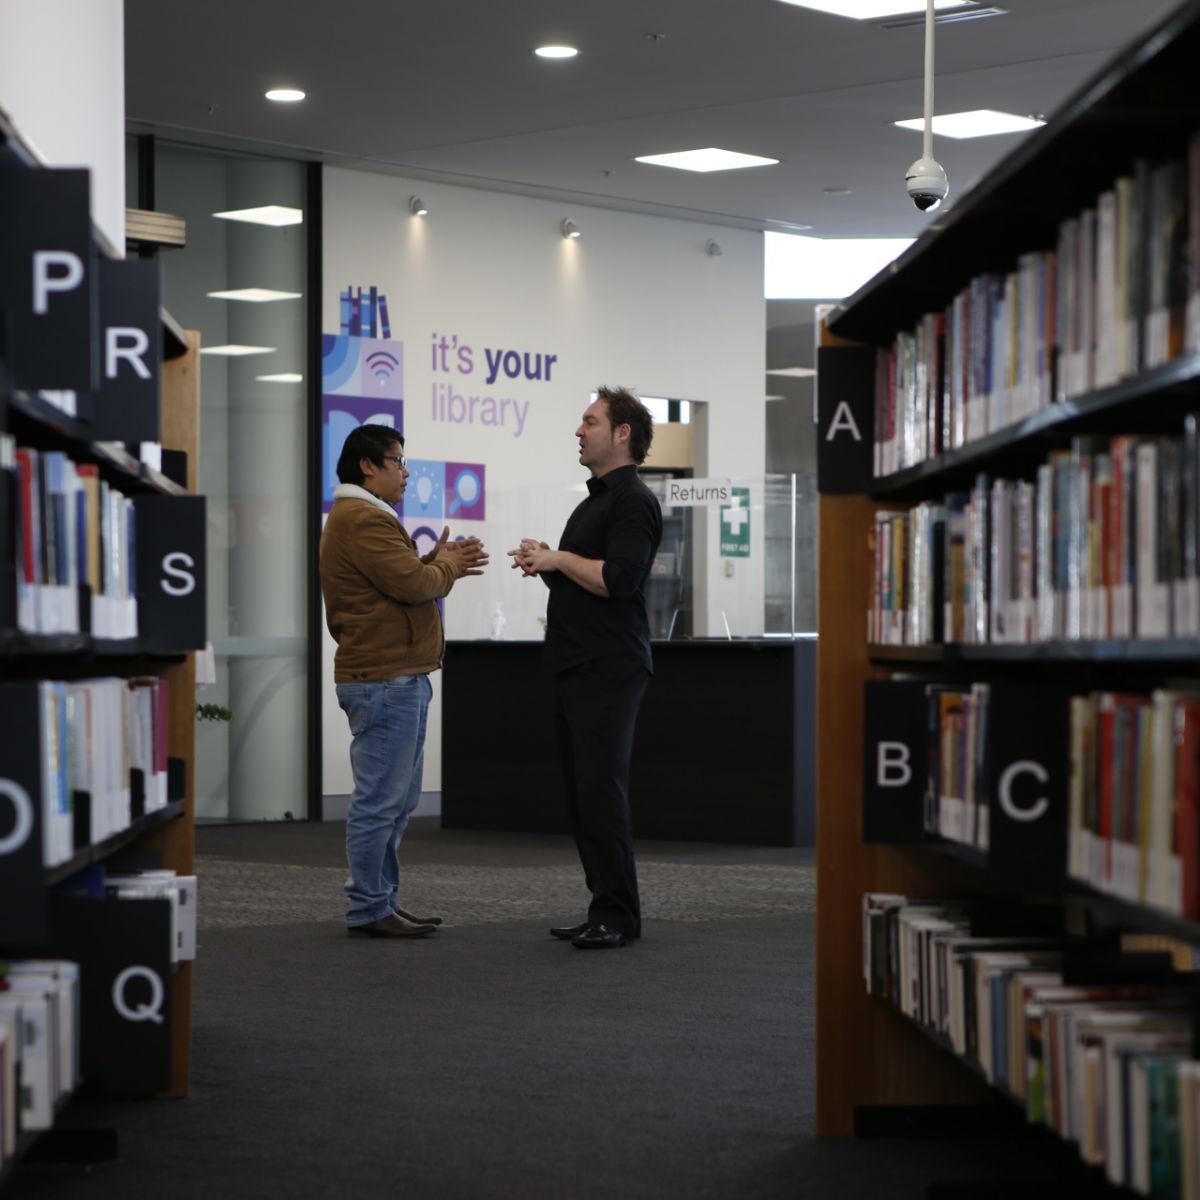 Two men standing at end of aisle of books at library